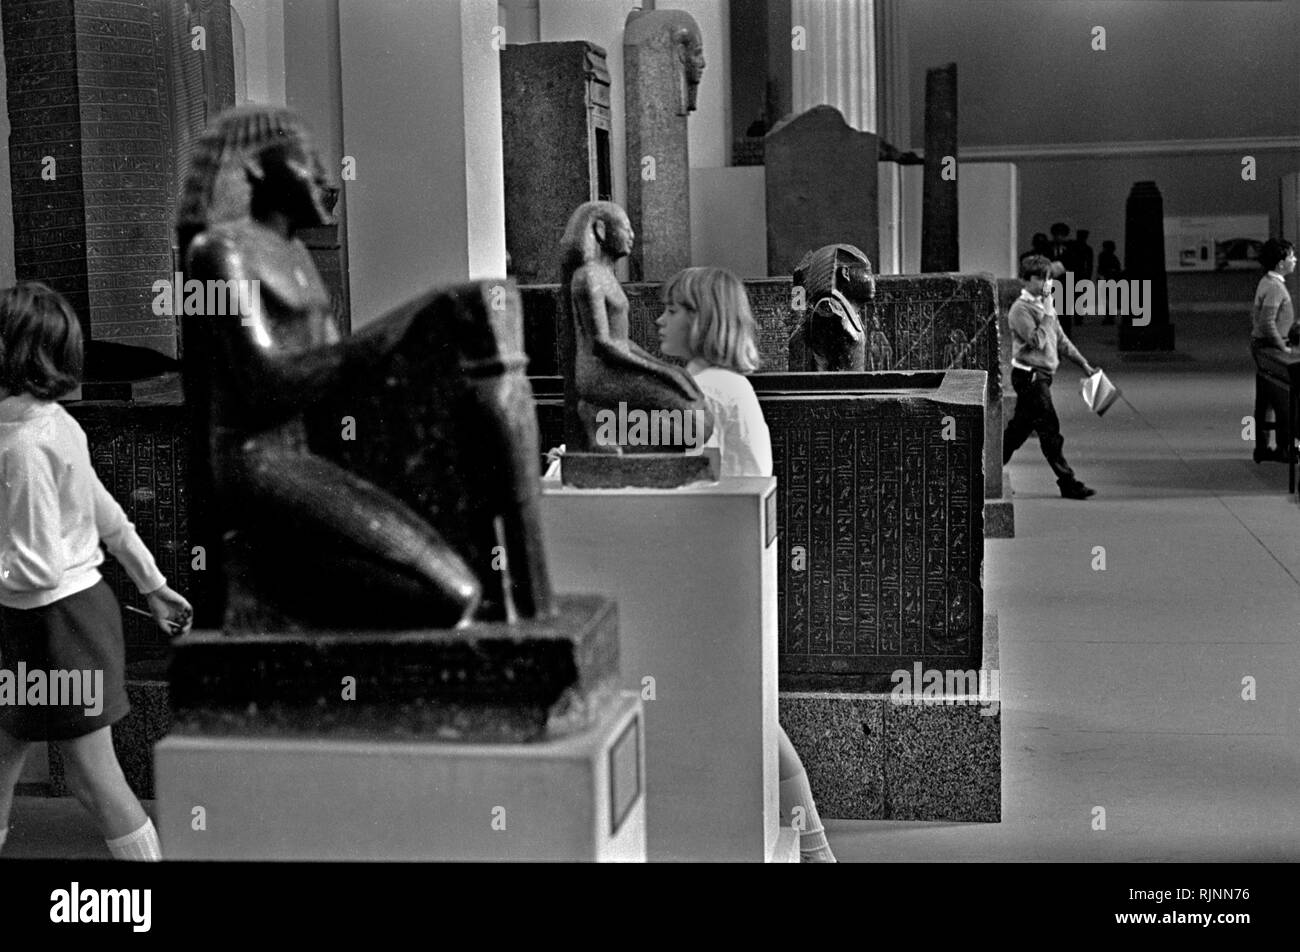 School outing to British Museum 1960s UK school trip to central London. Schoolchildren, kids wander around the museum displaying ancient Egyptian sculptures, now called The Egyptian Sculpture Gallery. 1969 HOMER SYKES Stock Photo